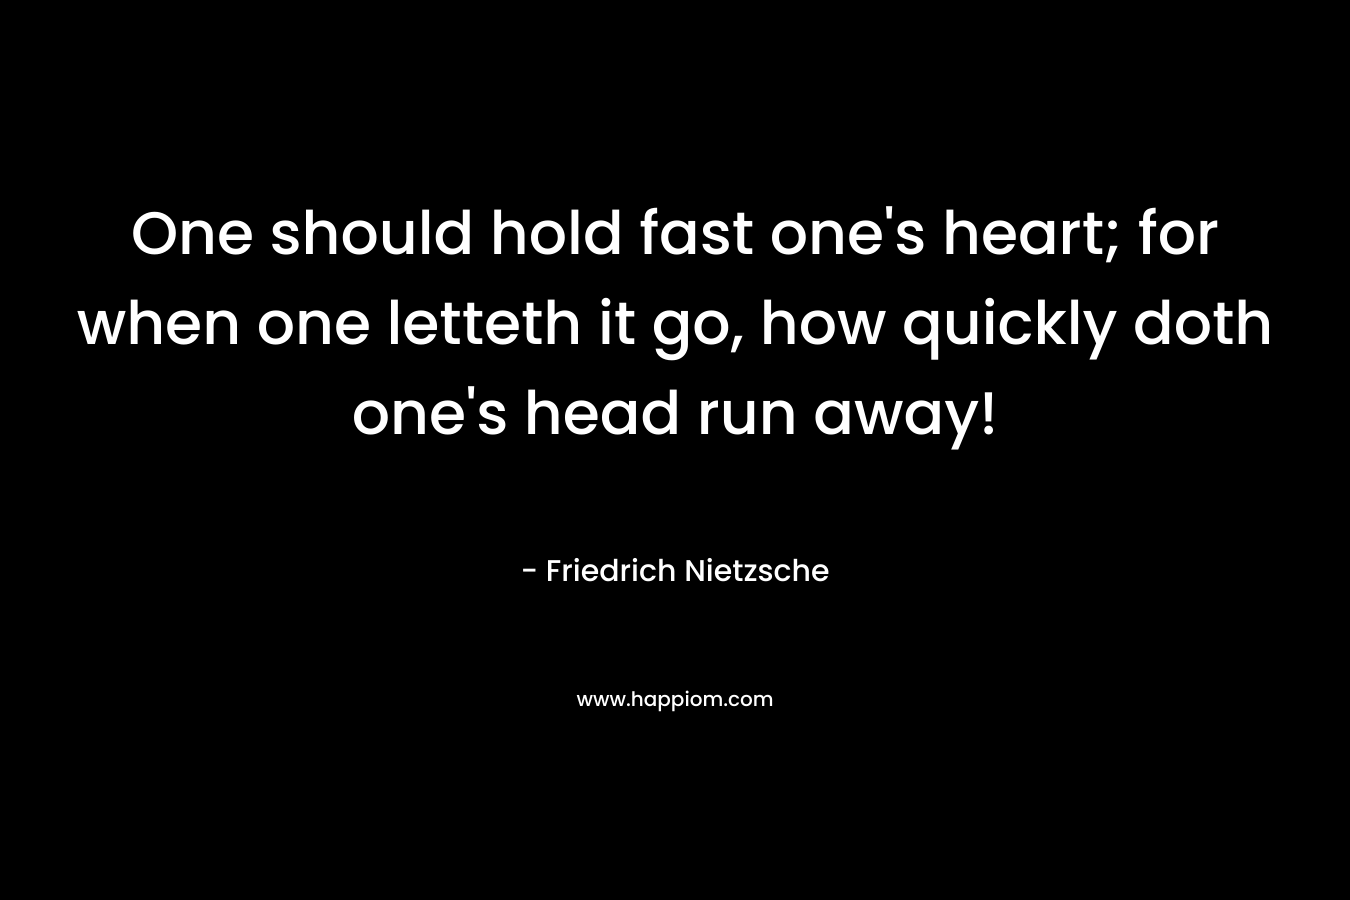 One should hold fast one’s heart; for when one letteth it go, how quickly doth one’s head run away! – Friedrich Nietzsche